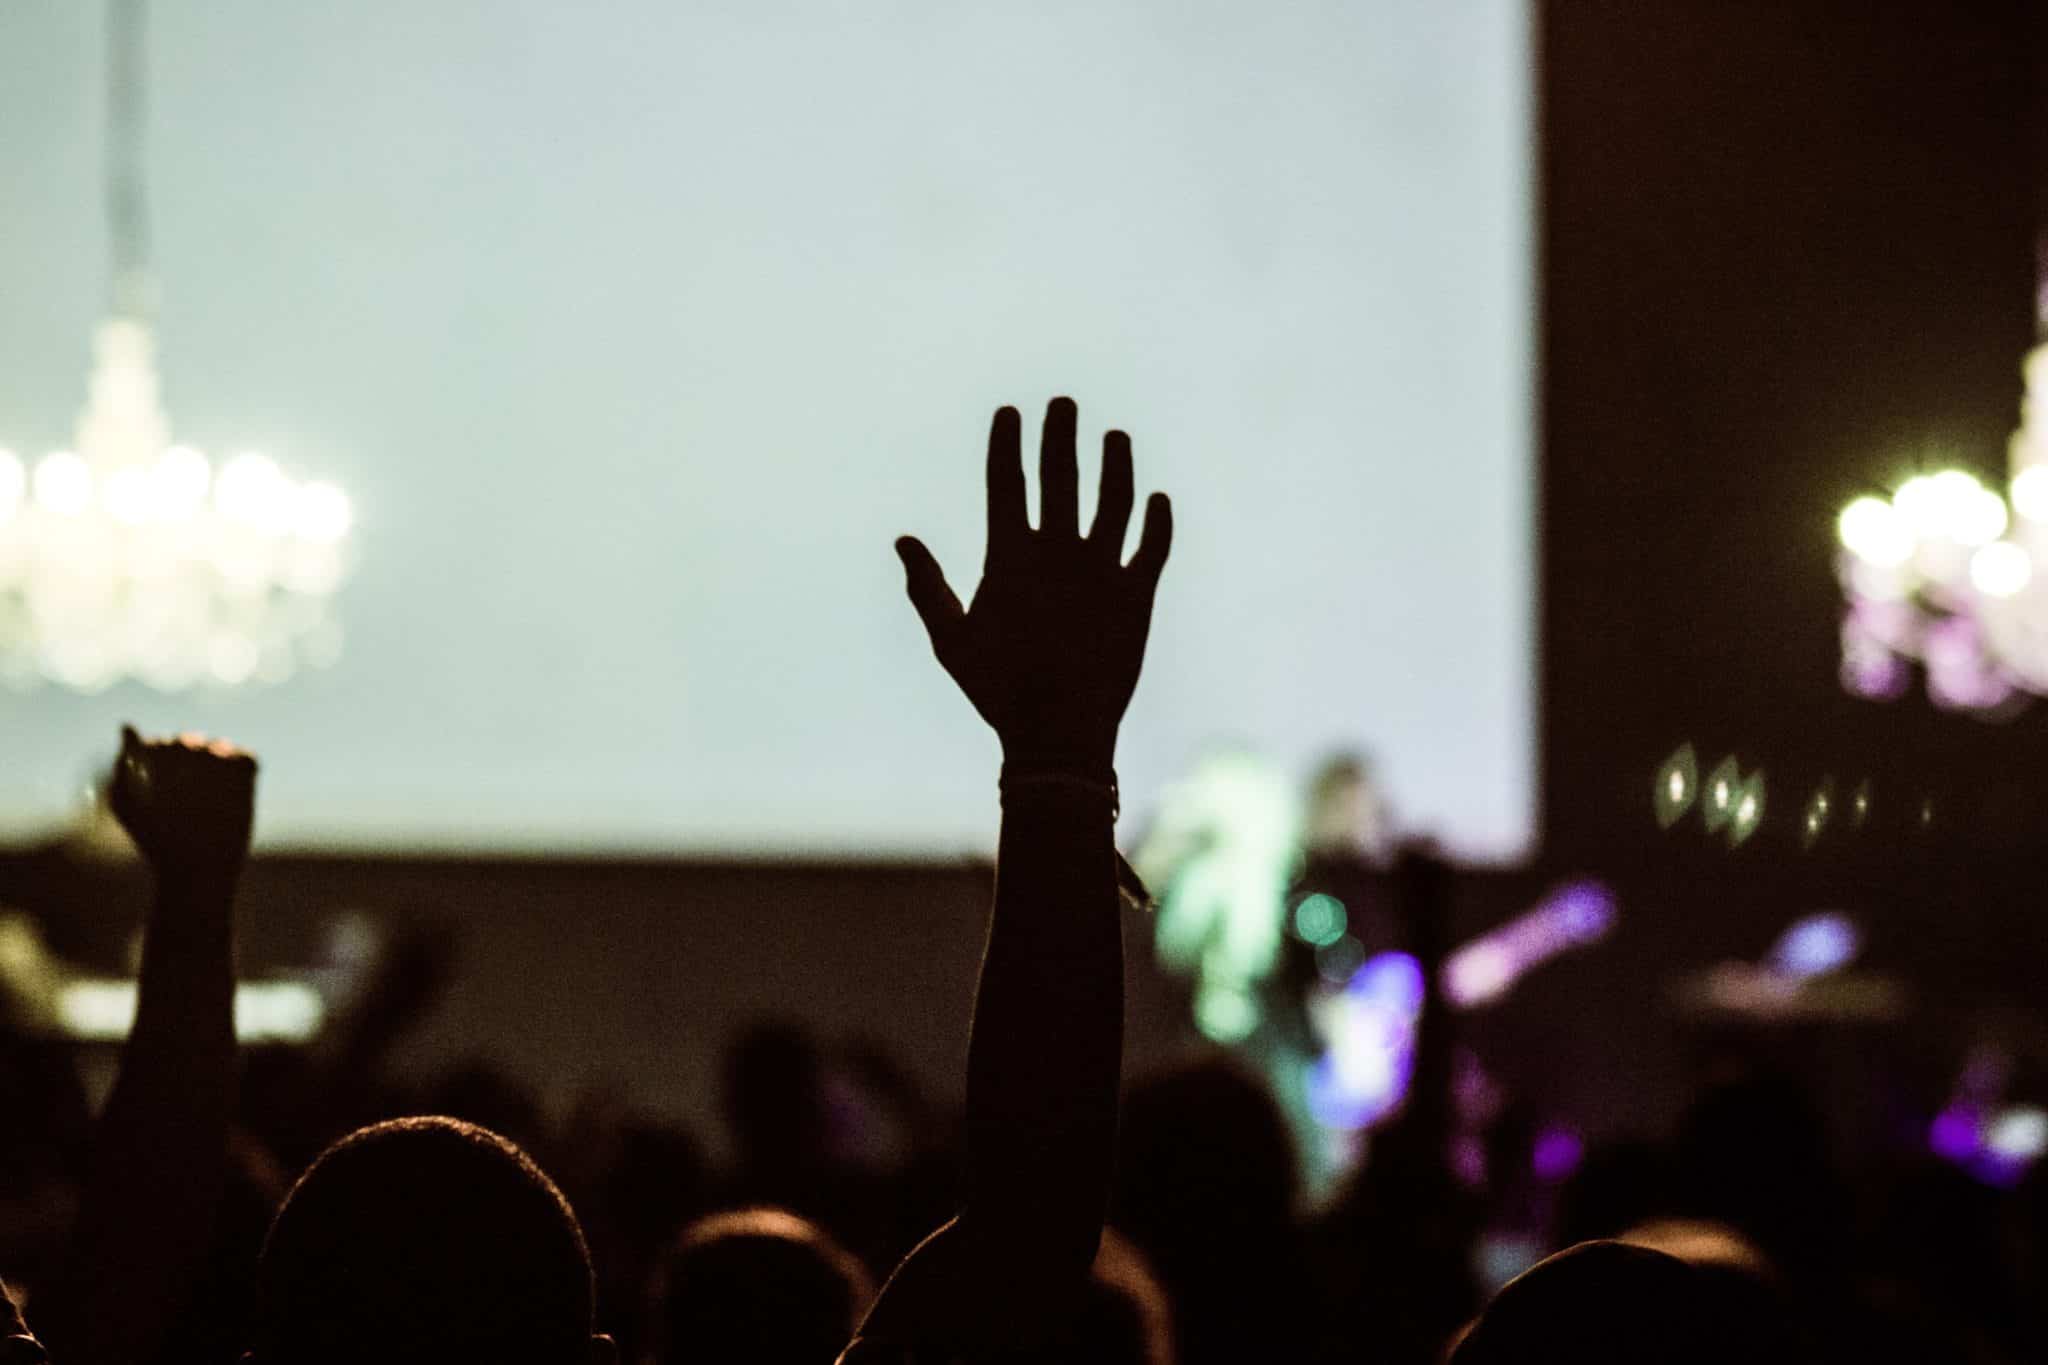 Photo of a crowd in front of a stage with one person's hand raised in silhouette